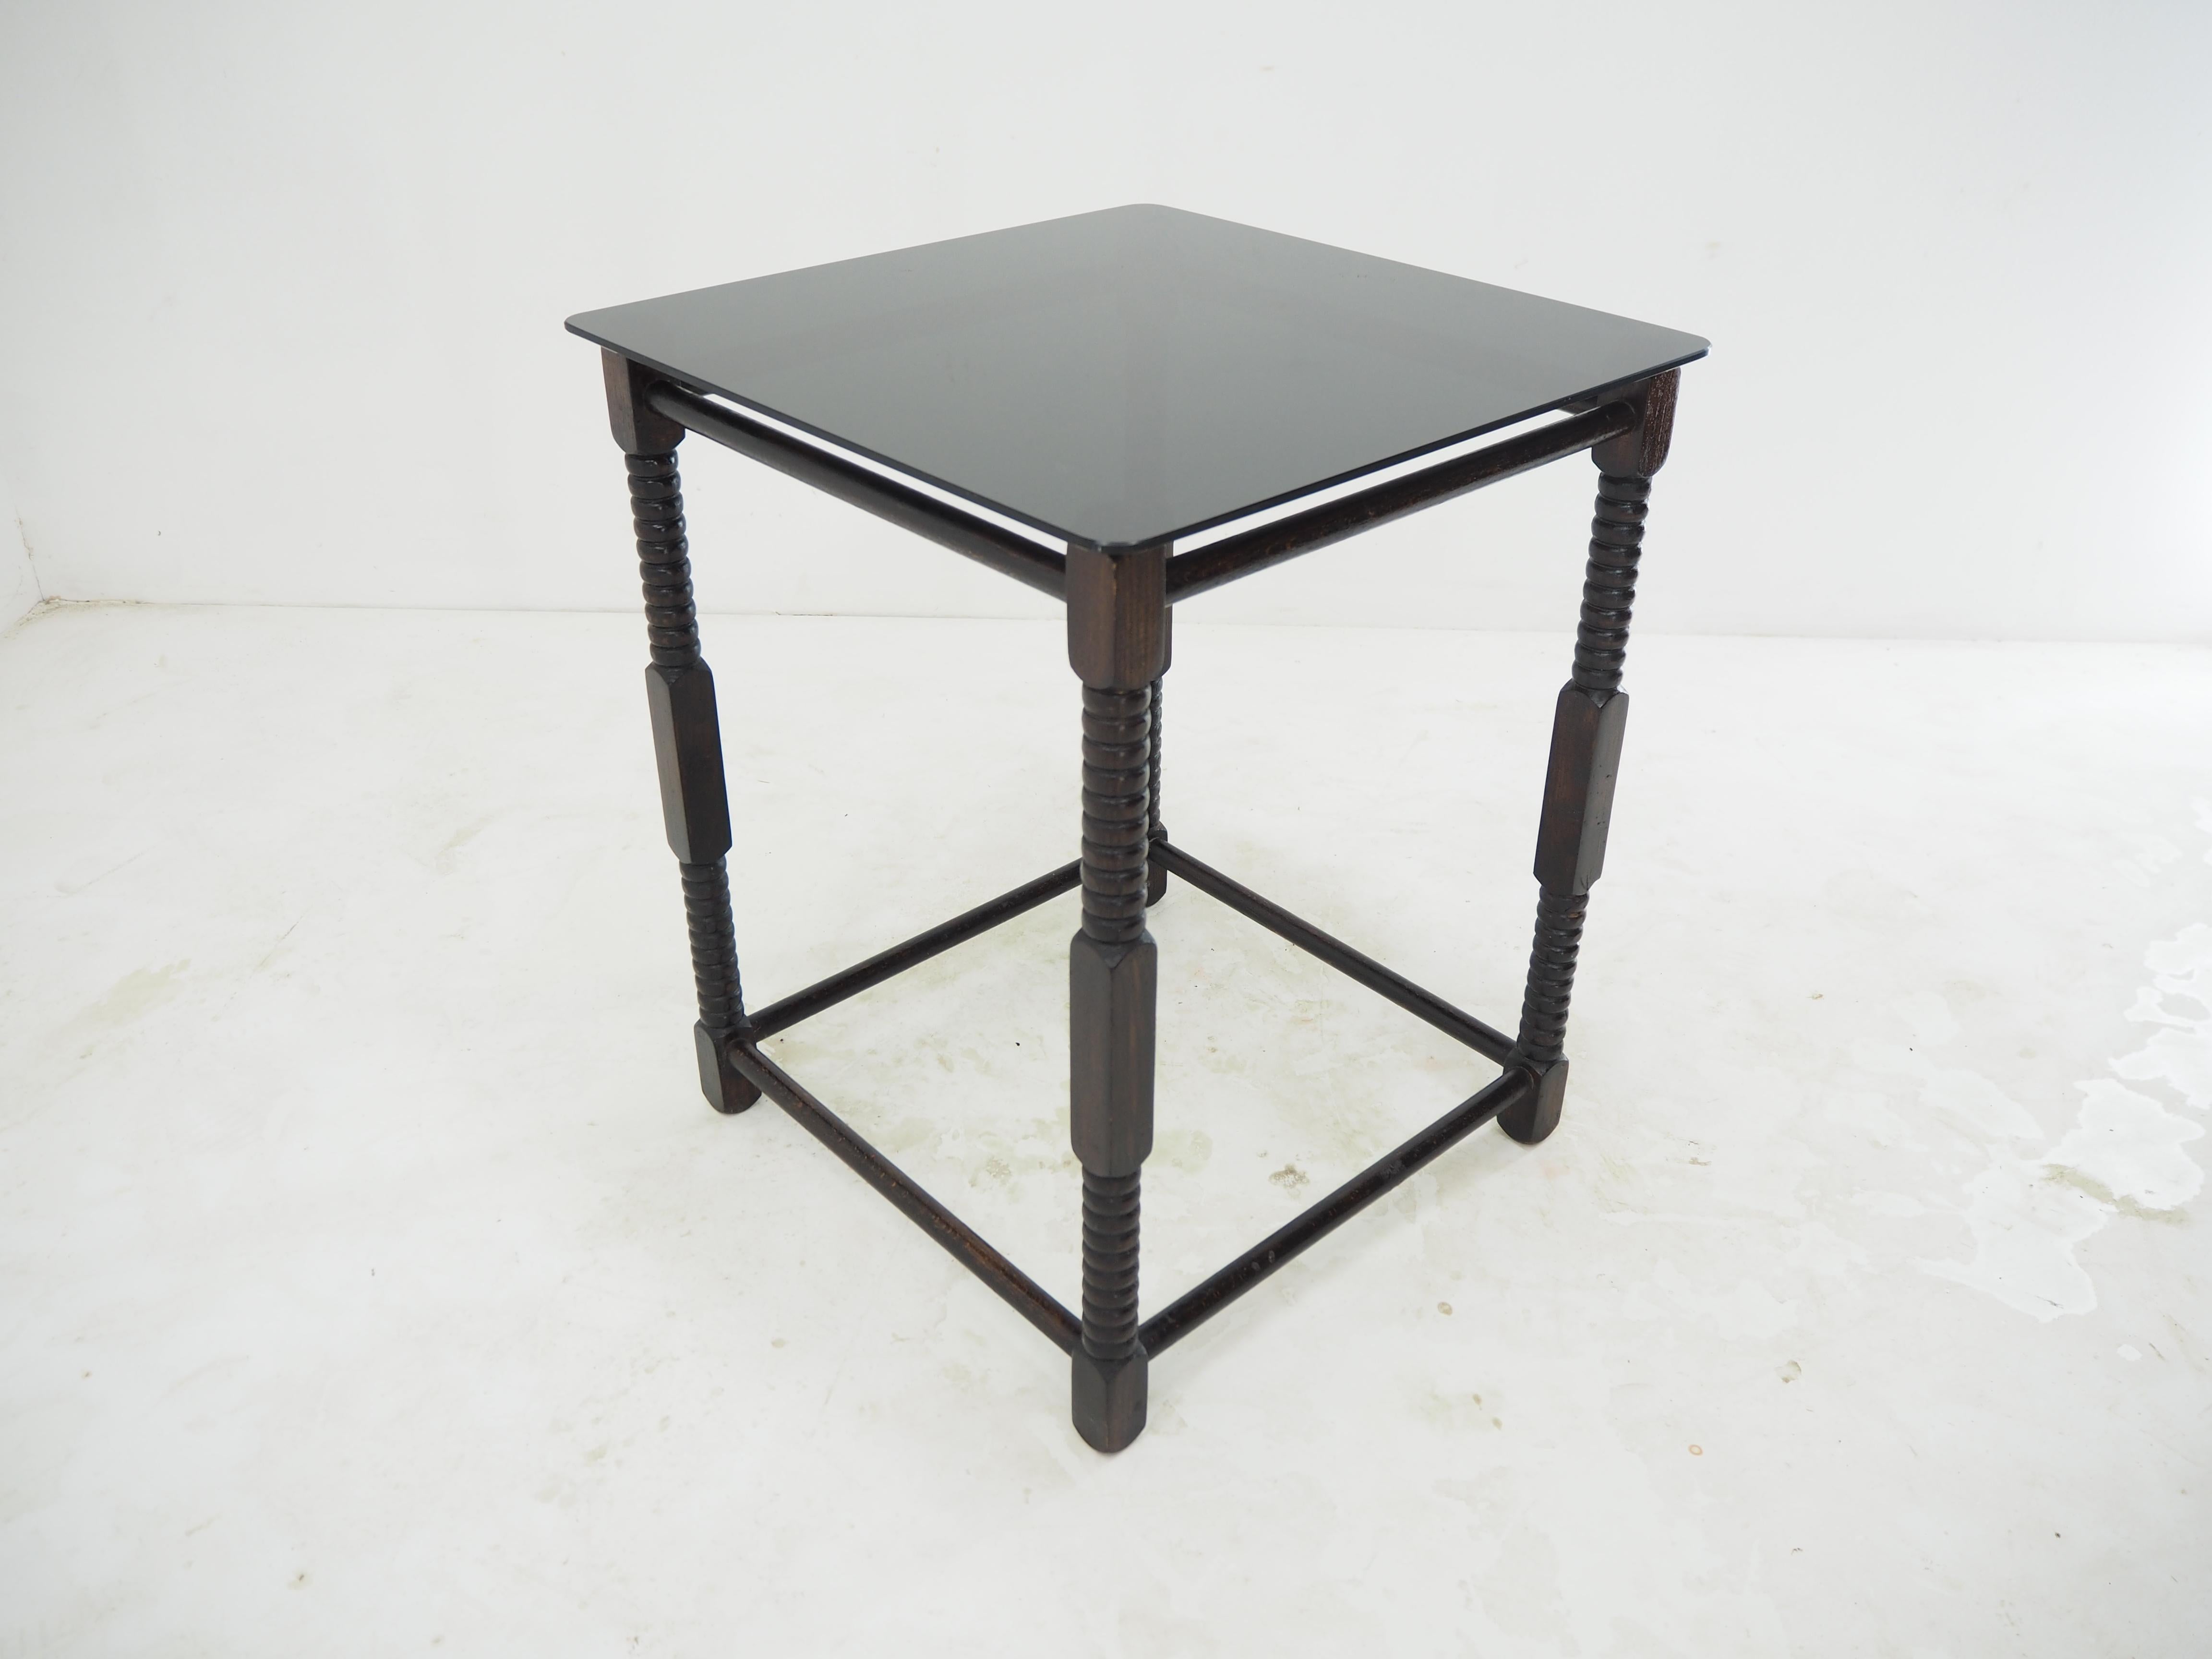 Midcentury Glass and Wood Table, Europe, 1960s For Sale 2